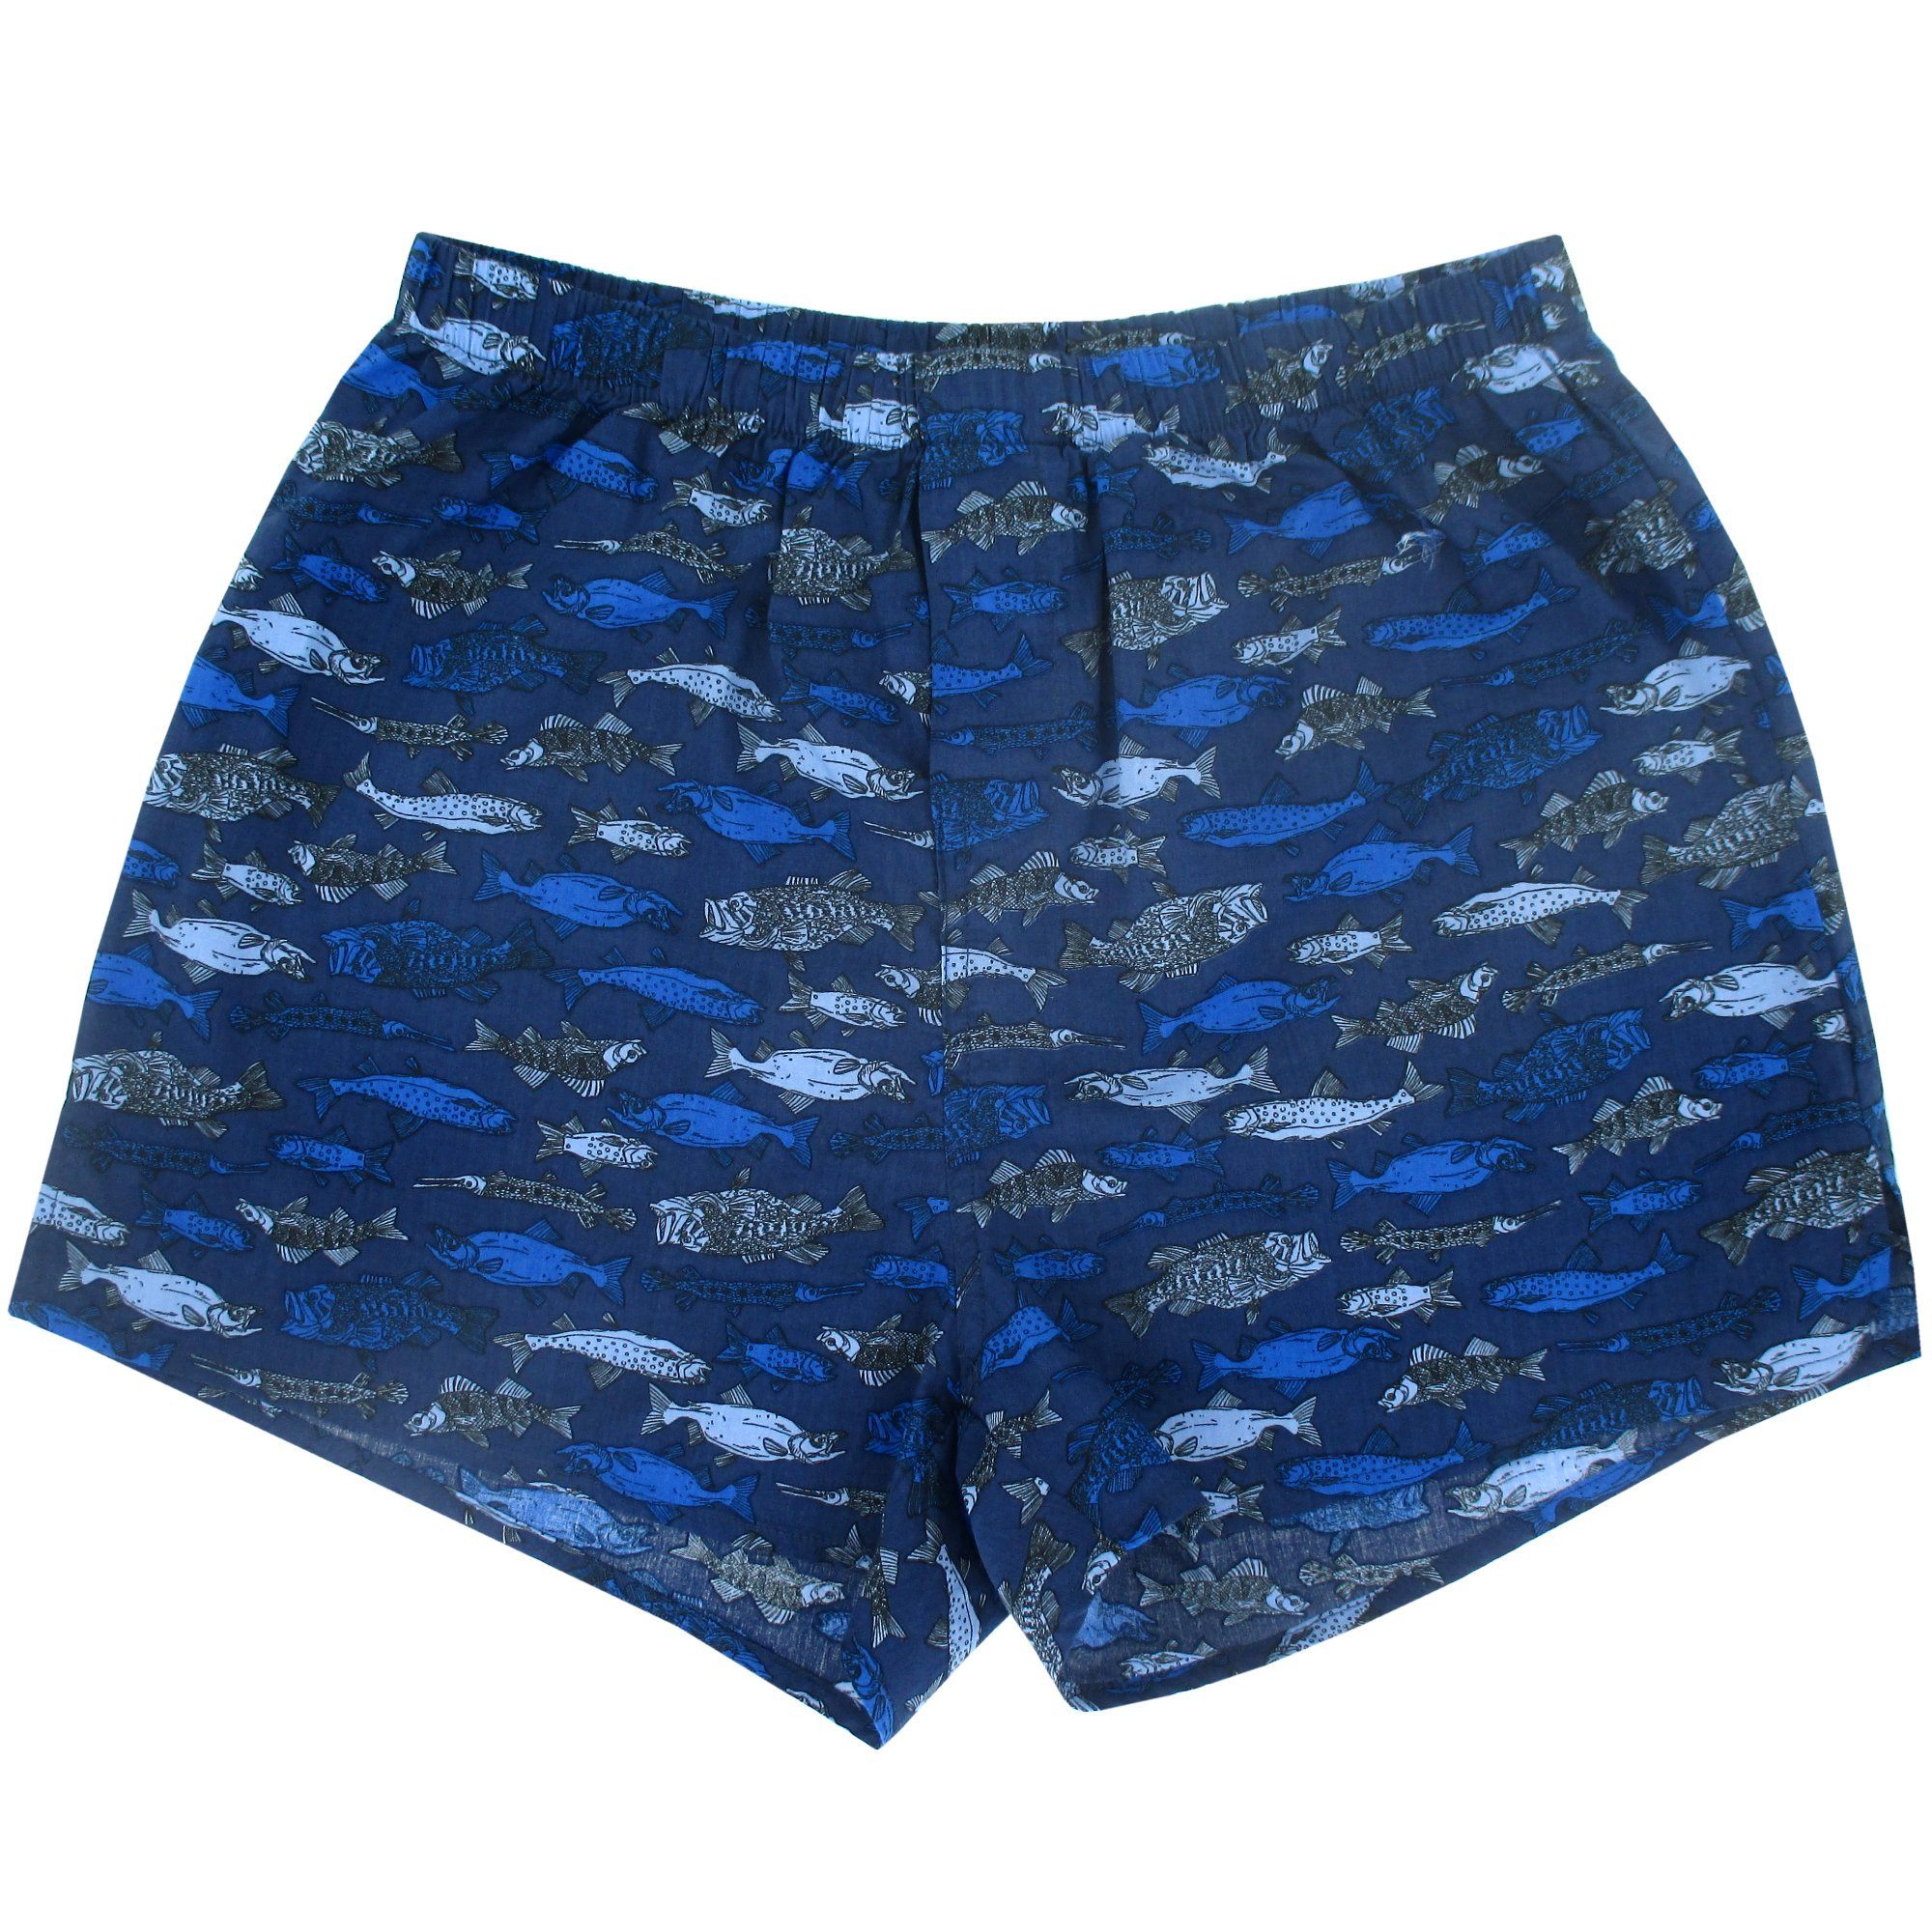 Colorful Freshwater Fish Patterned Cotton Boxer Shorts for Manly Men by Rock Atoll